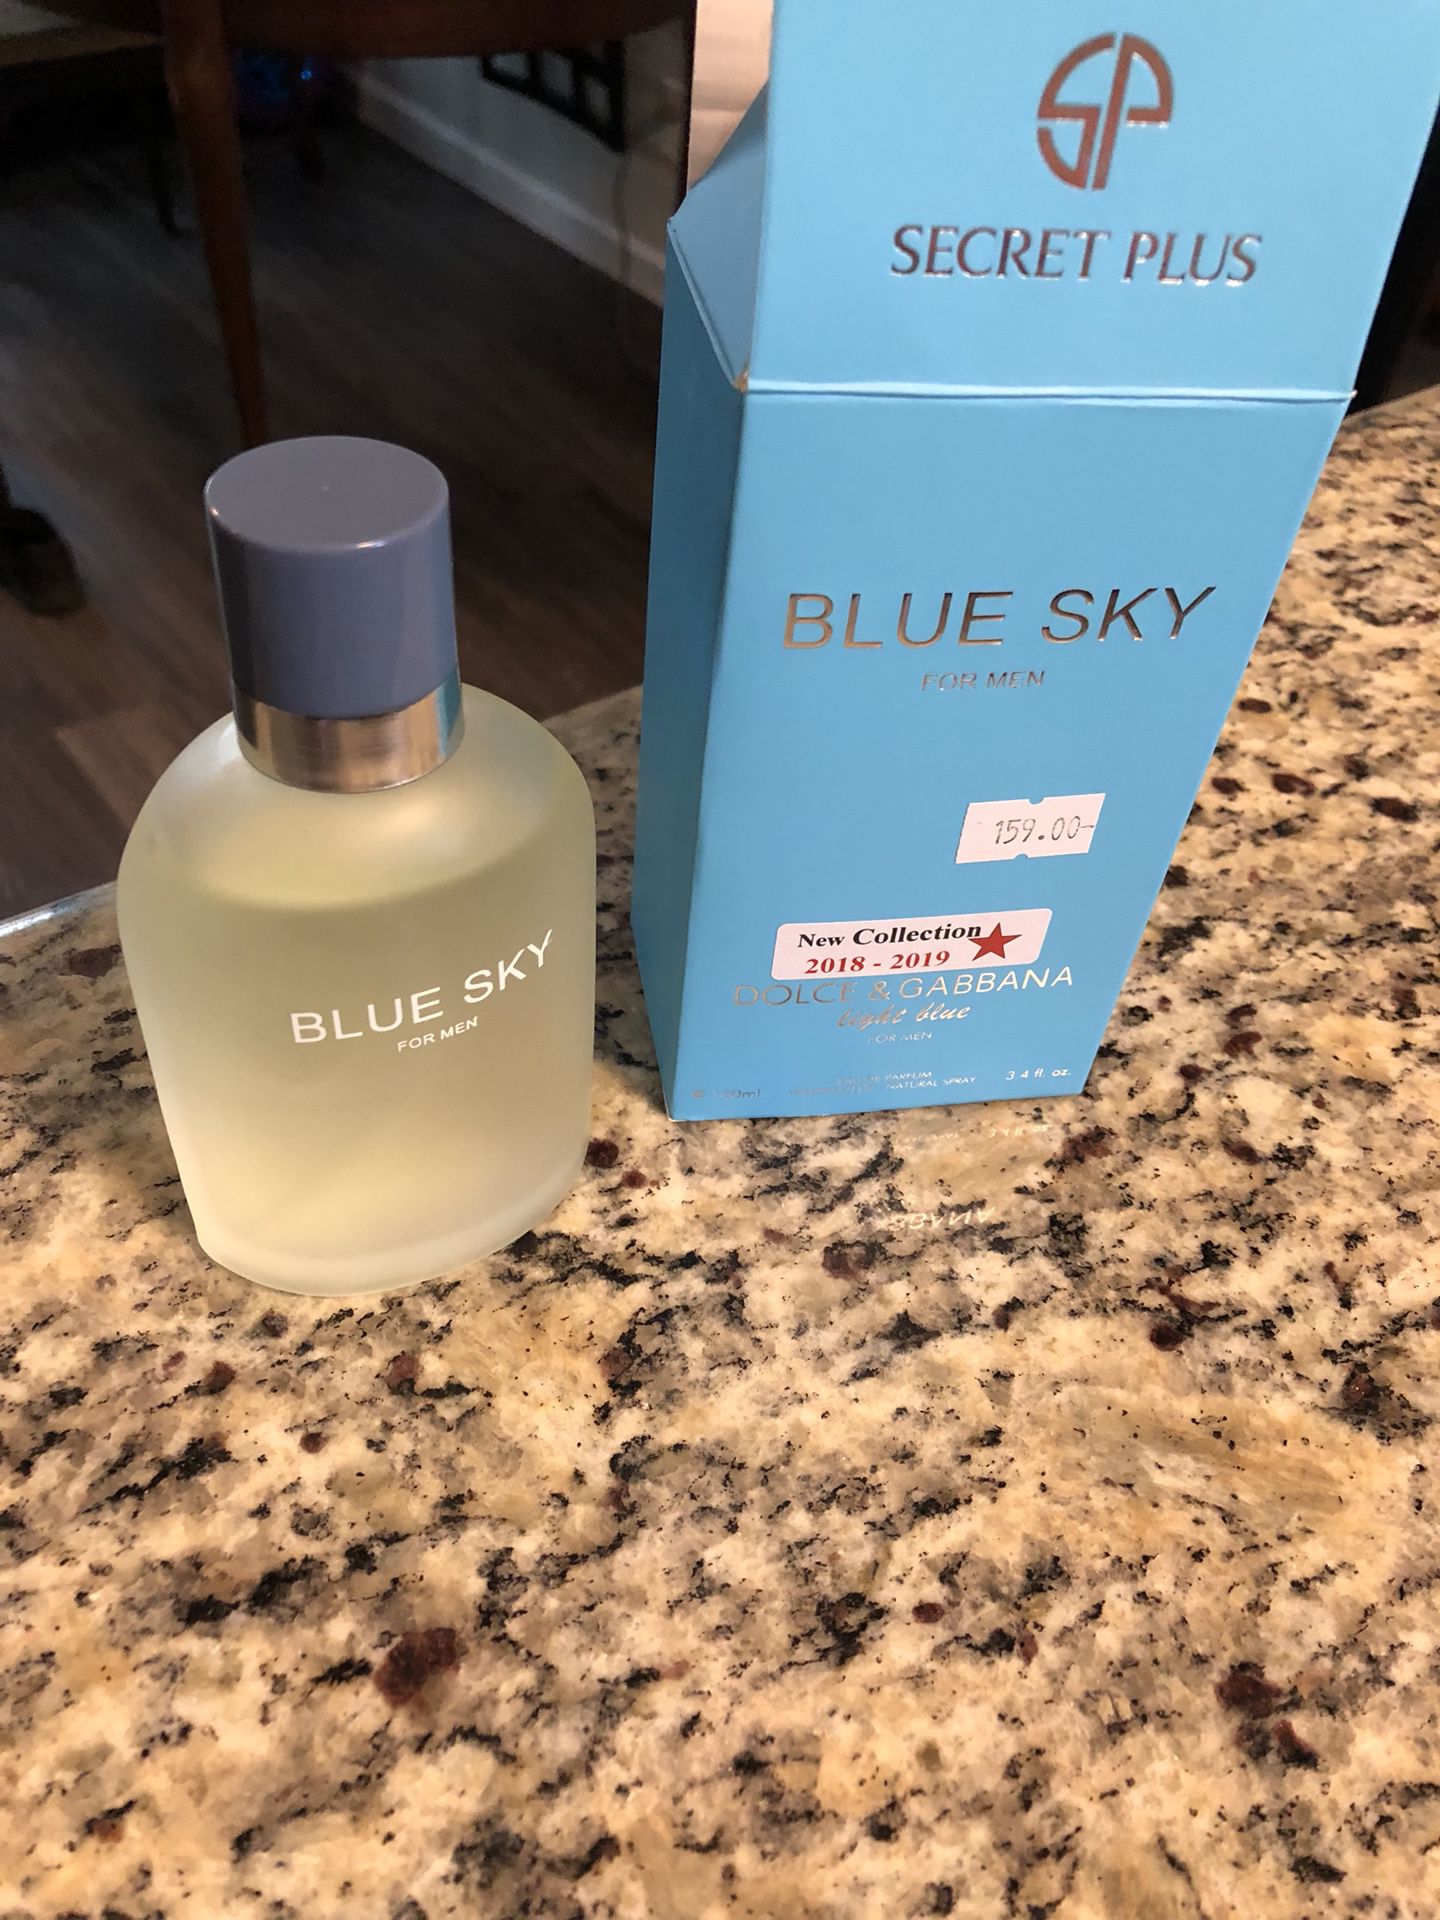 Dr Squatch Cologne - Glacial Falls for Sale in Cumming, GA - OfferUp